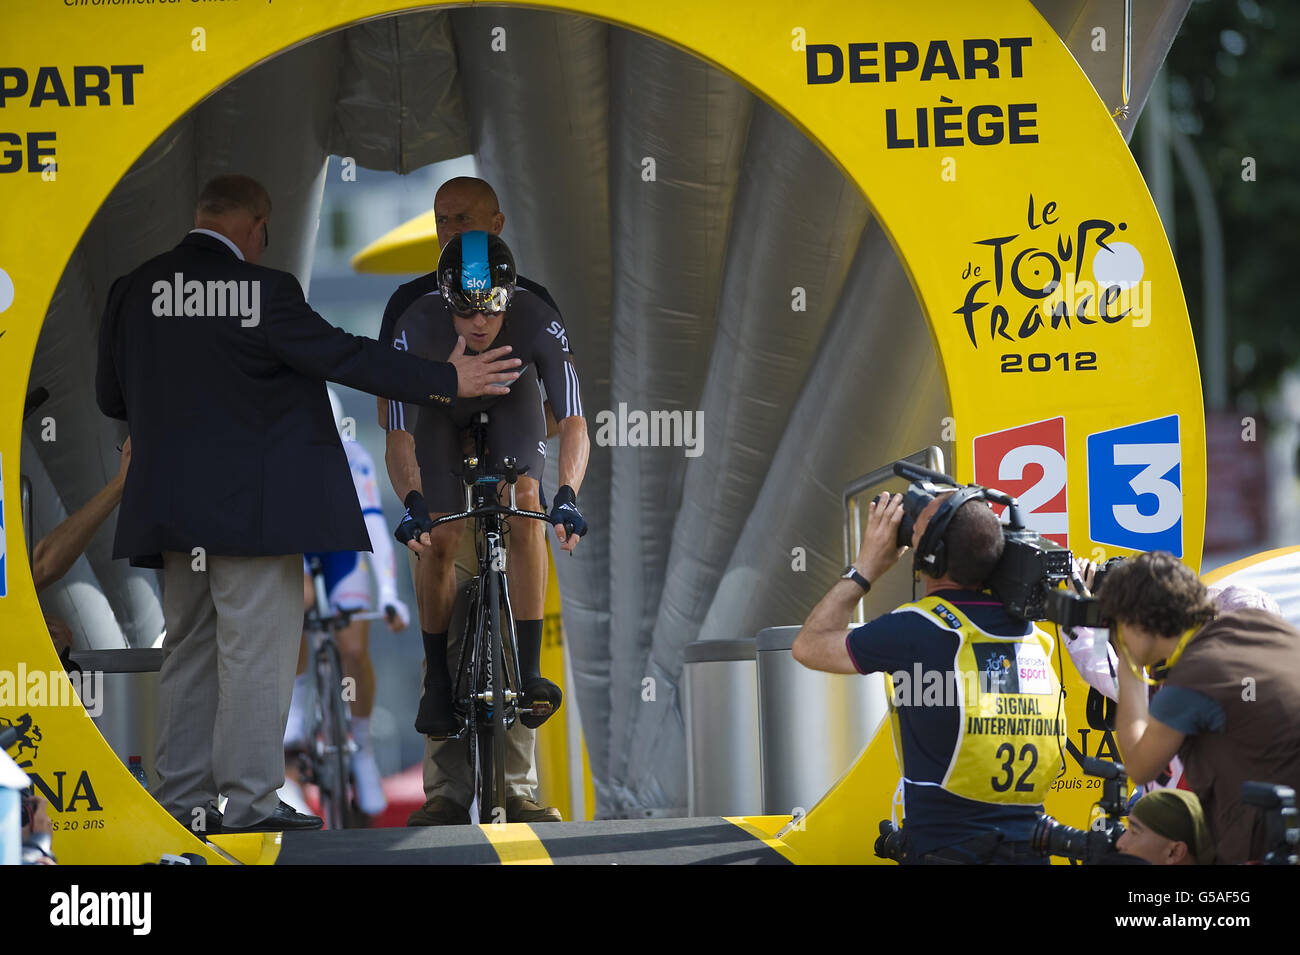 Cycling - 2012 Tour de France - Prologue Stage - Liege. Bradley Wiggins is counted down off the starting ramp during the Prologue Stage of the 2012 Tour de France in Liege, Belgium. Stock Photo